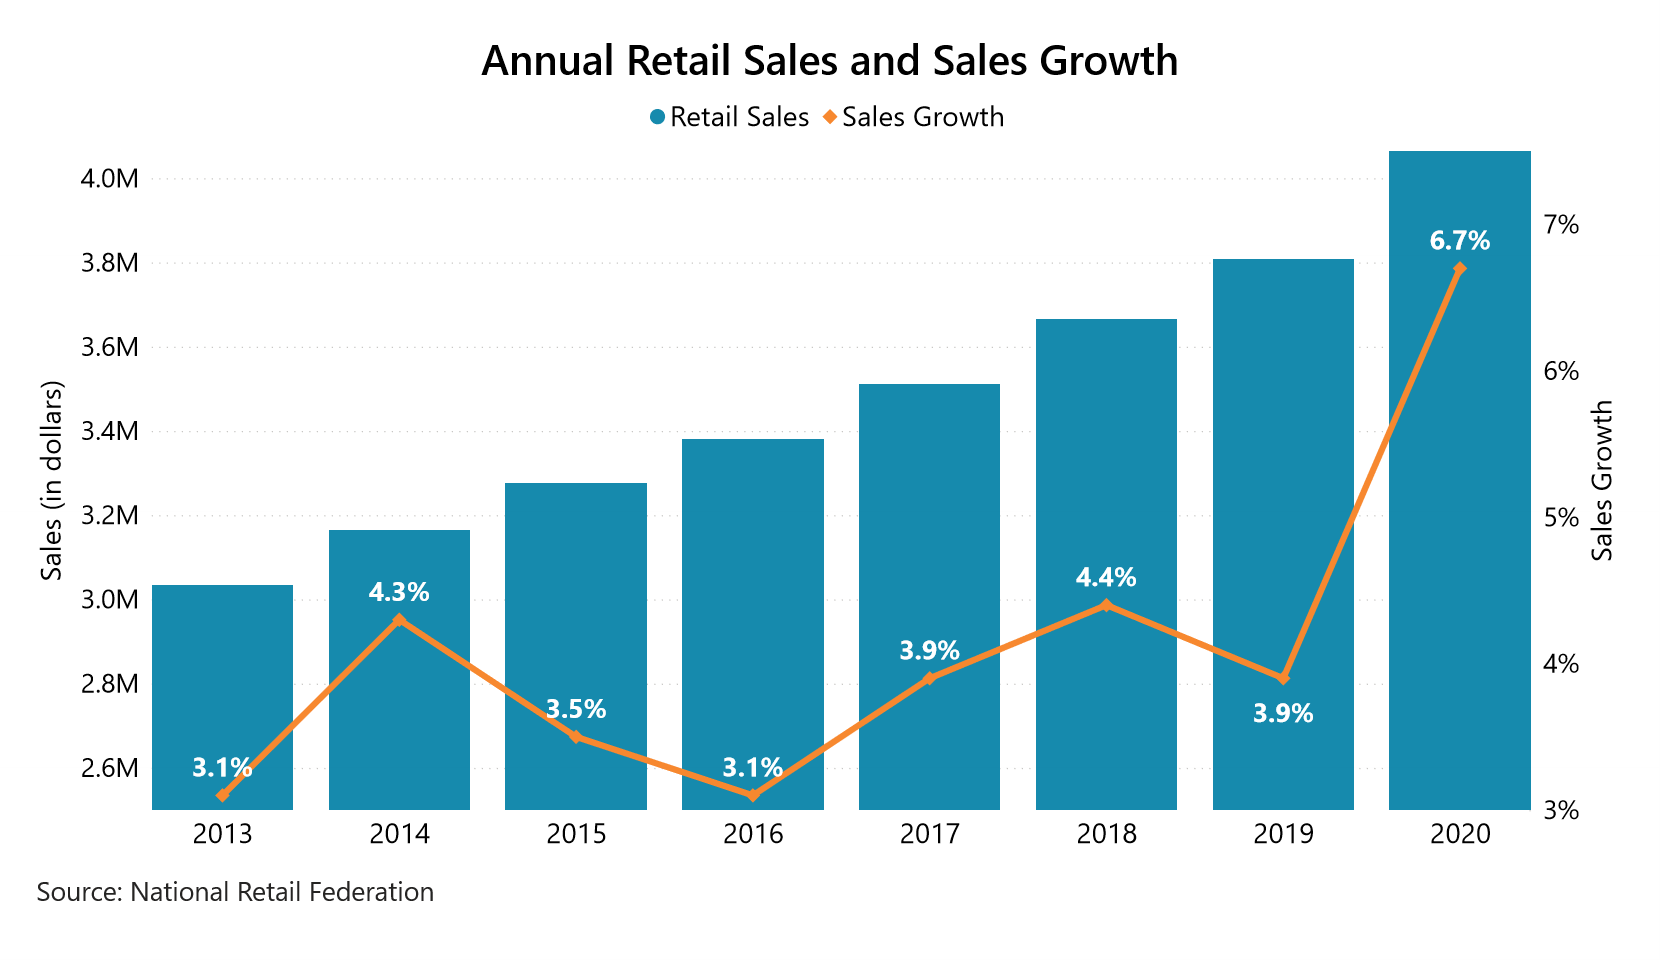 Annual retail sales and sales growth in the US from 2013 to 2020